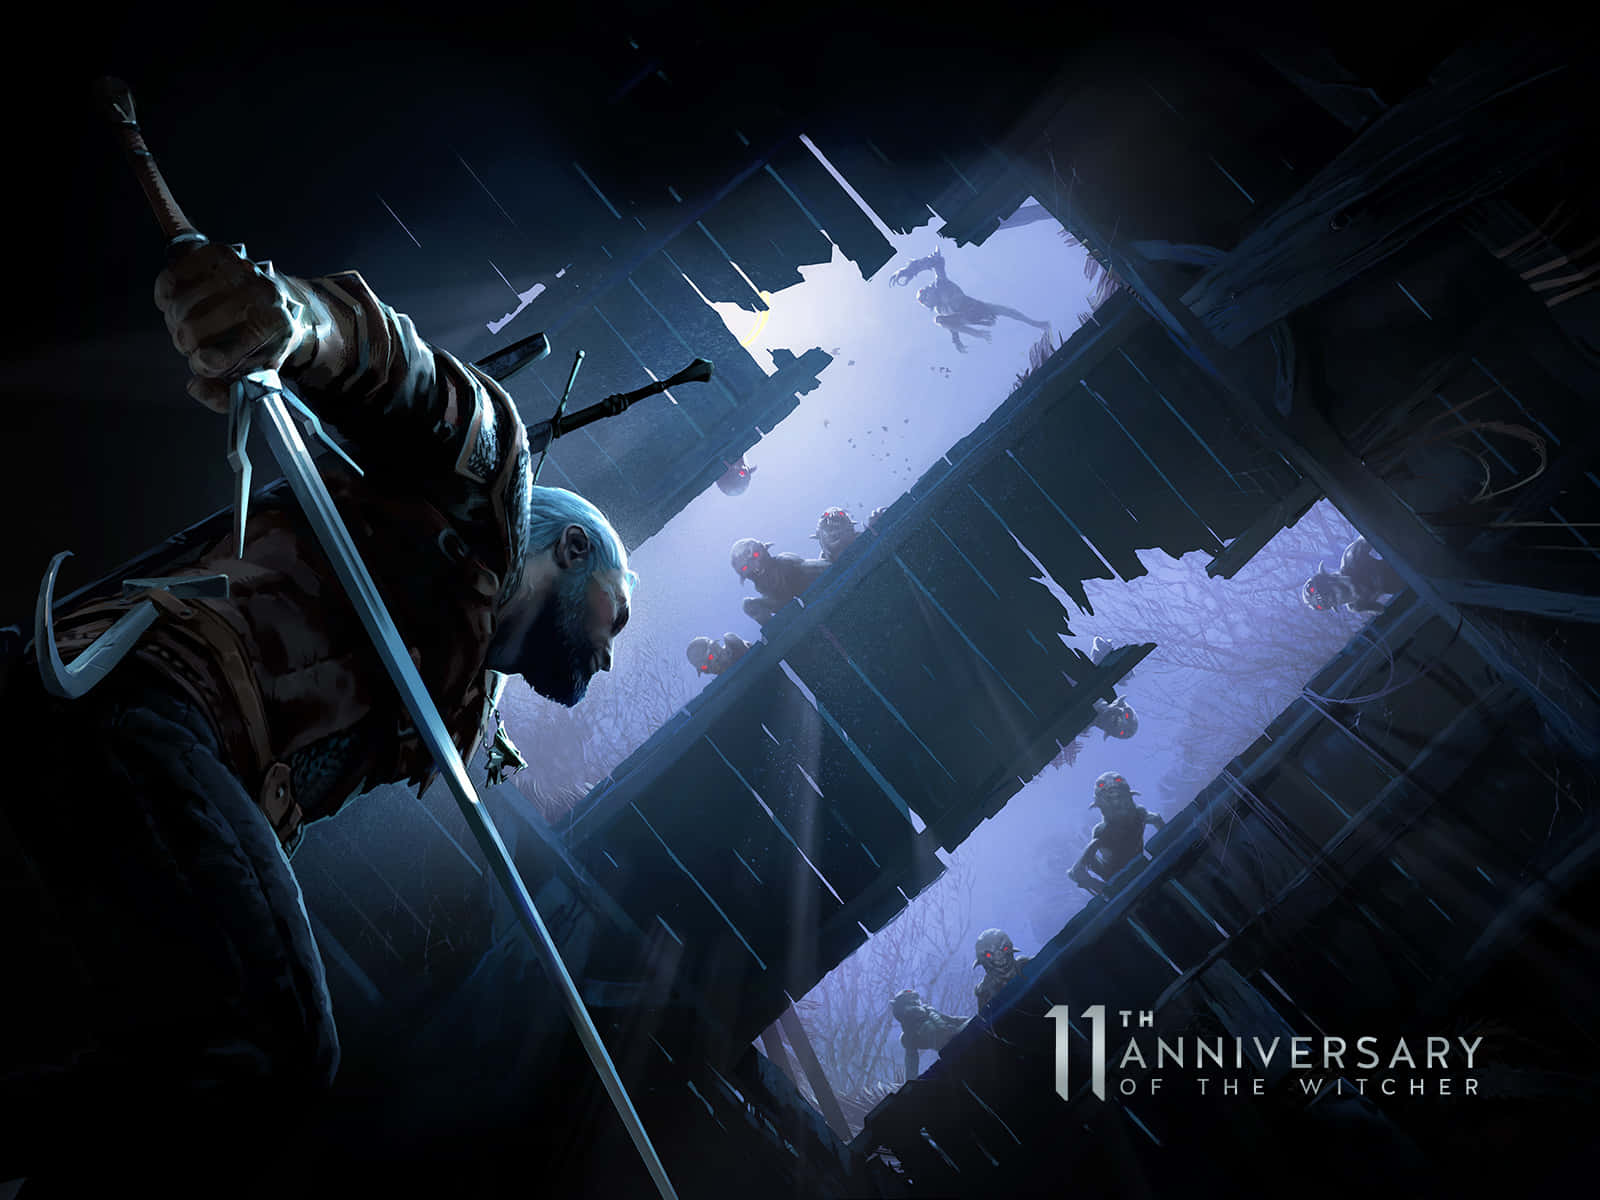 Anniversary Video Game The Witcher Wallpaper